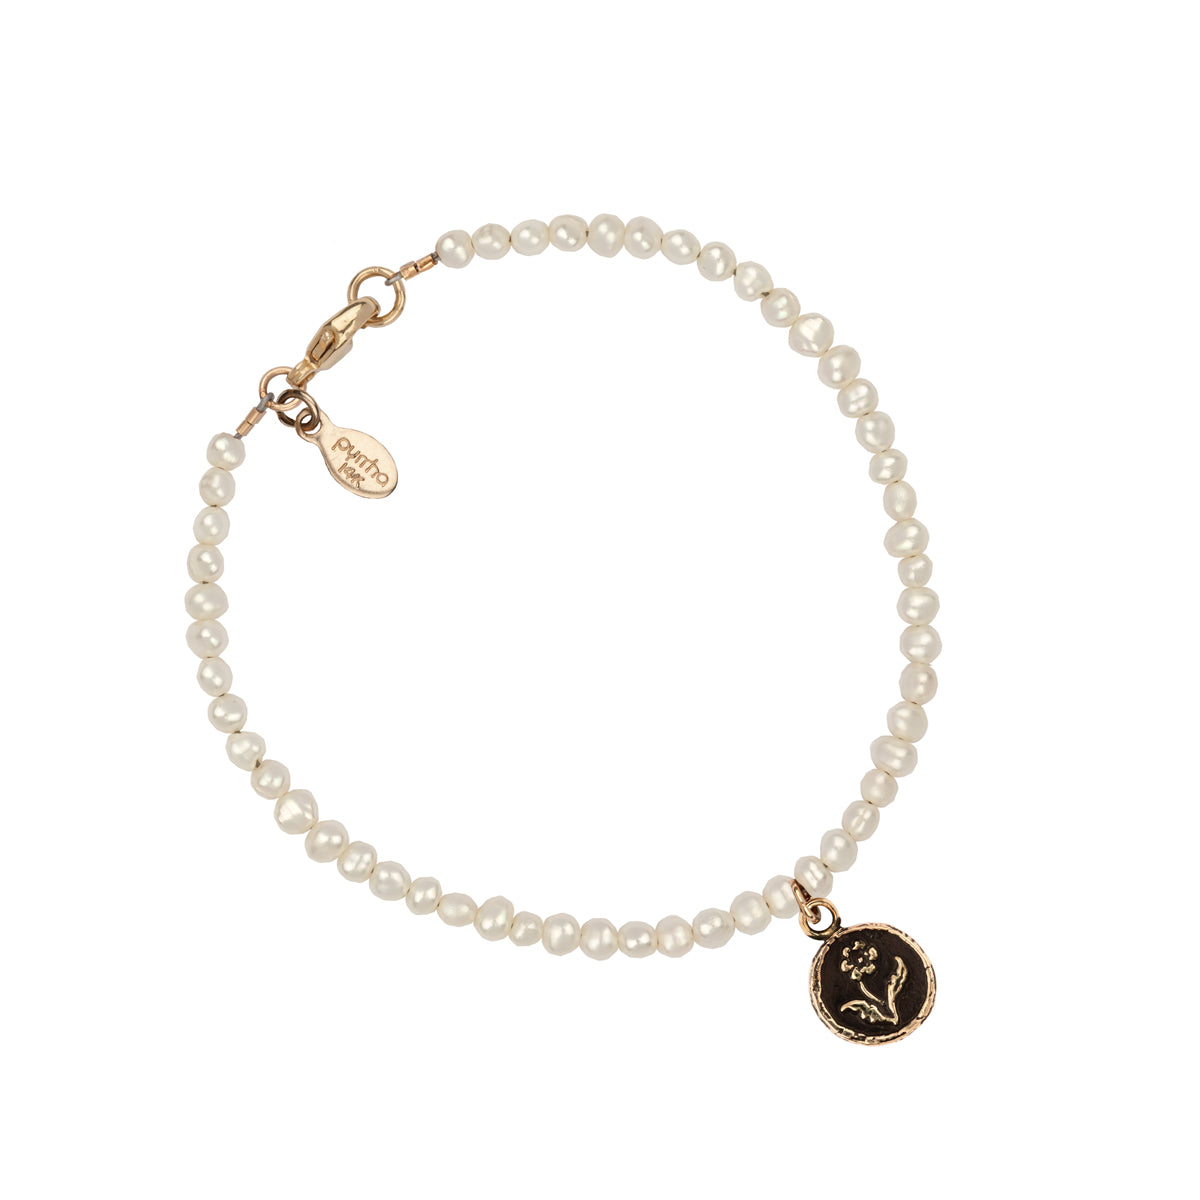 A hand-knotted bracelet of ivory pearls featuring our 14k gold rose talisman.